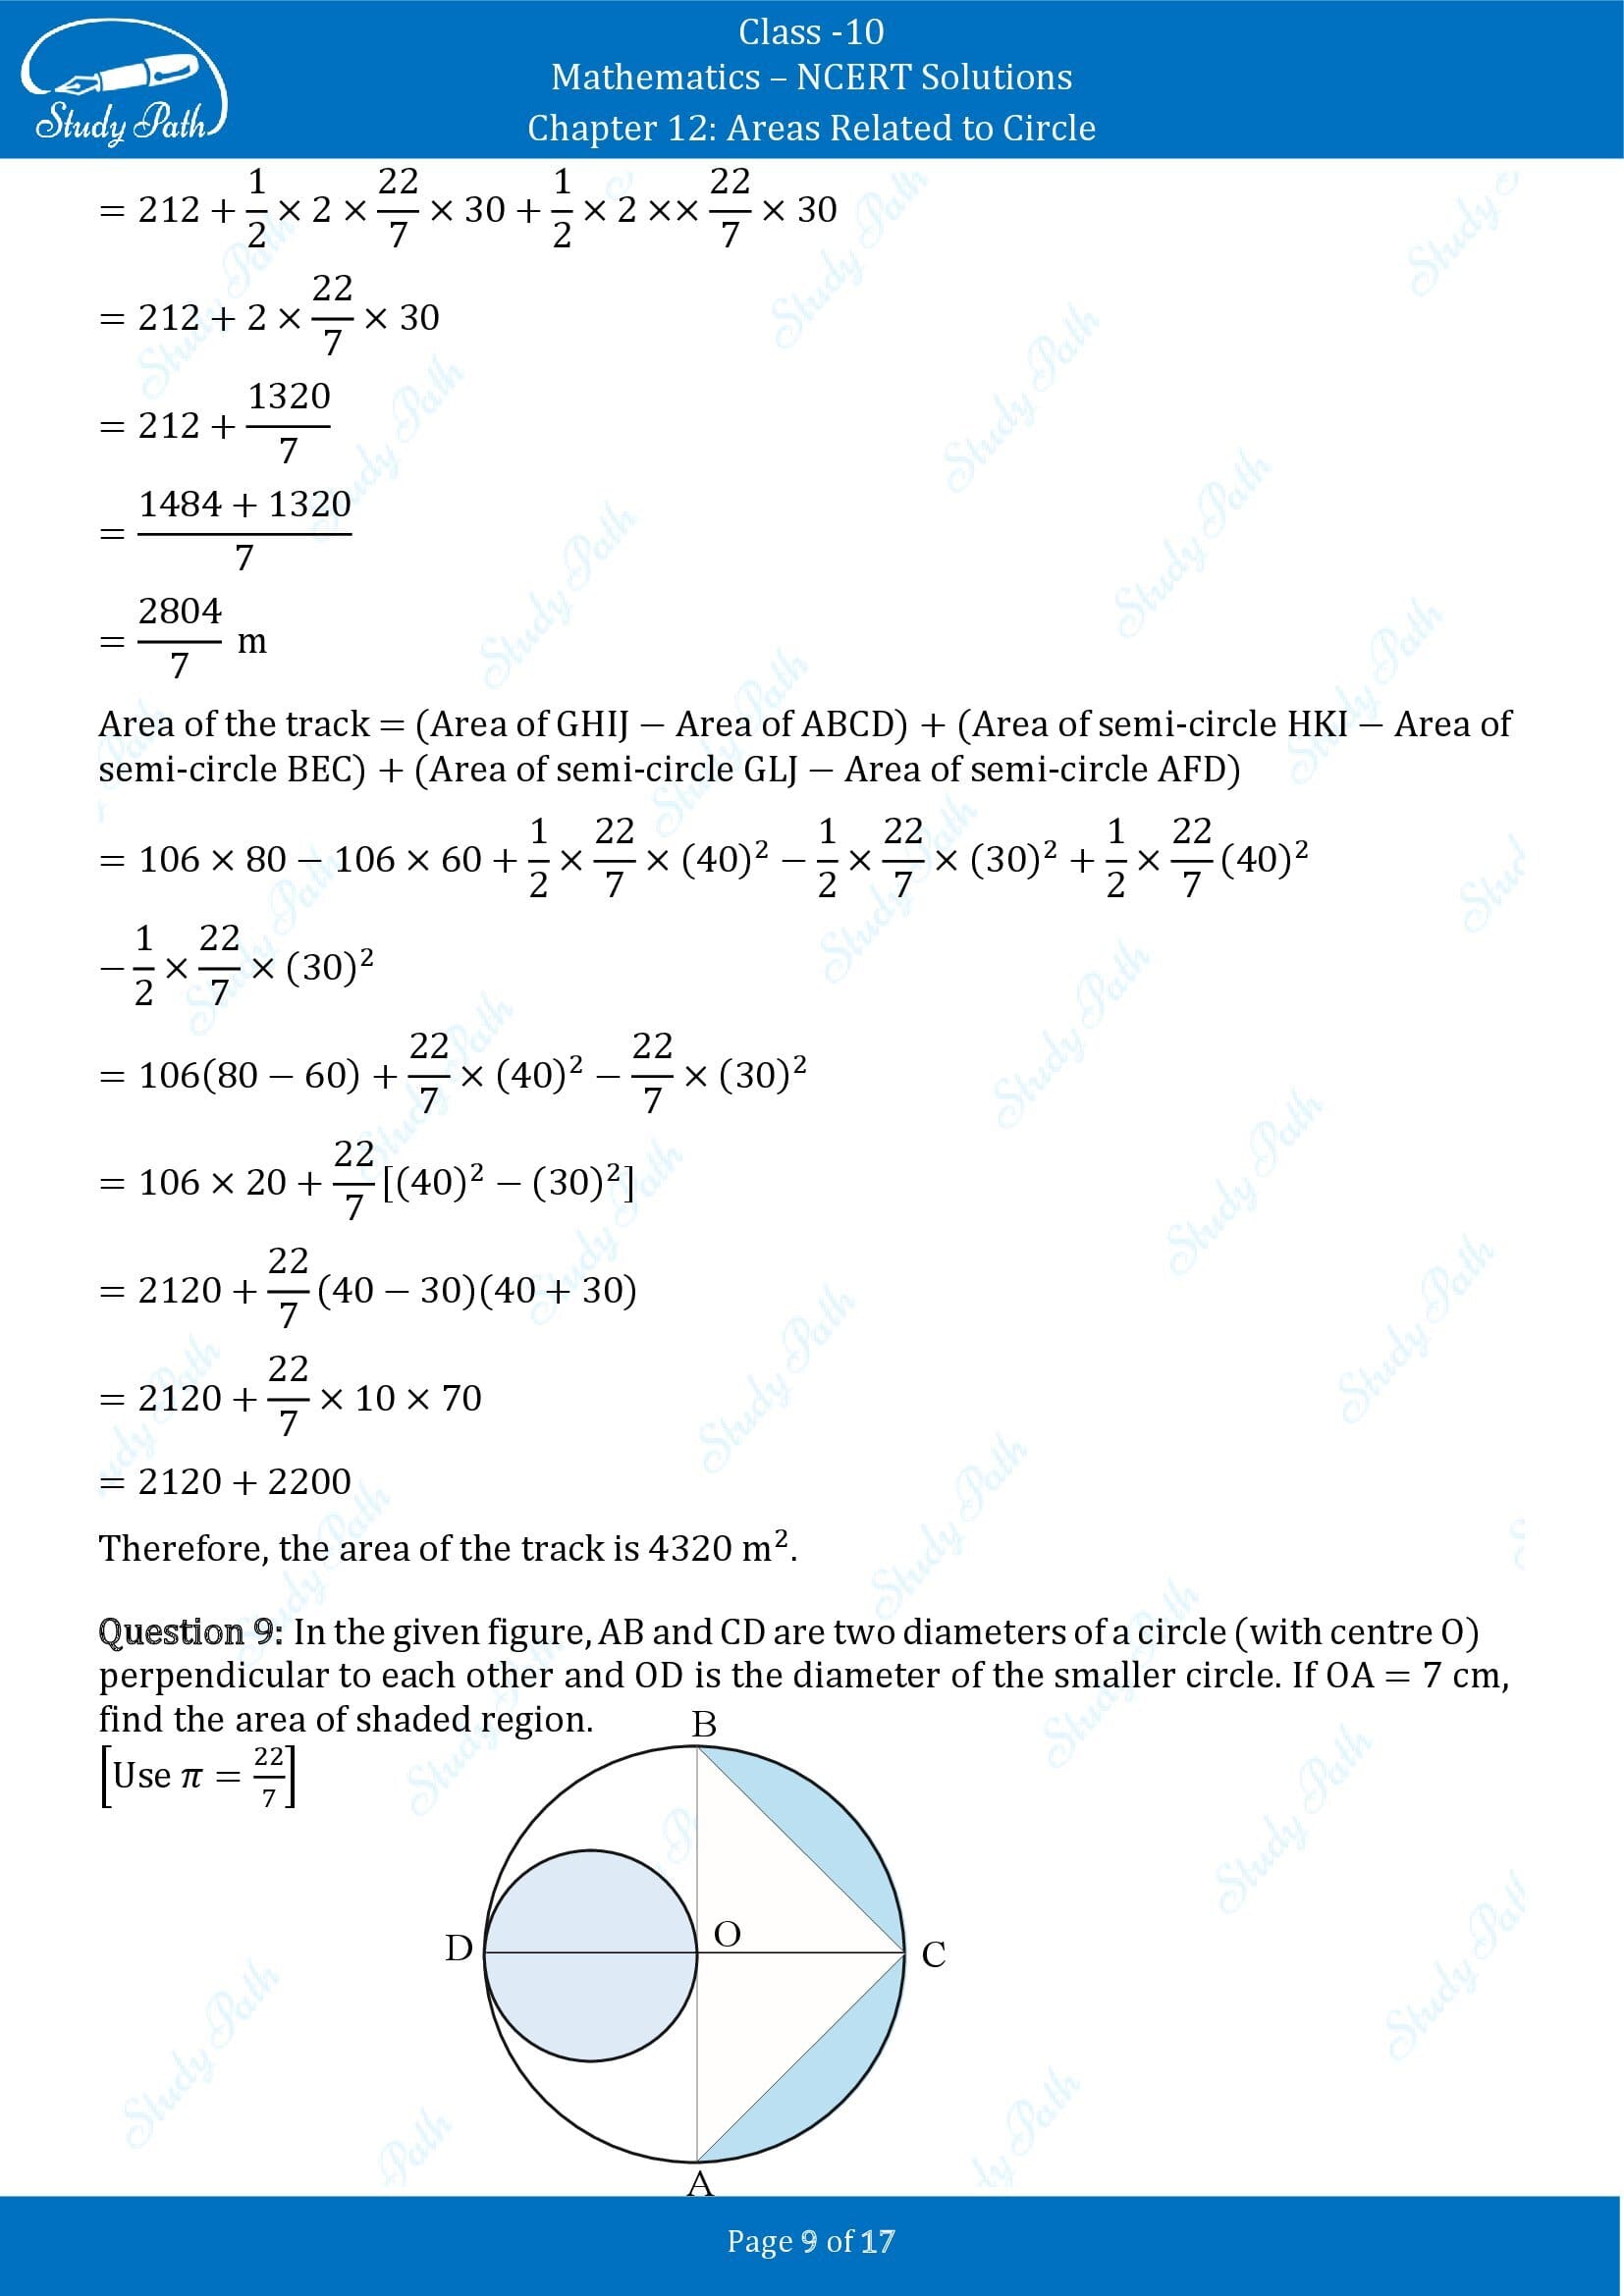 NCERT Solutions for Class 10 Maths Chapter 12 Areas Related to Circles Exercise 12.3 00009